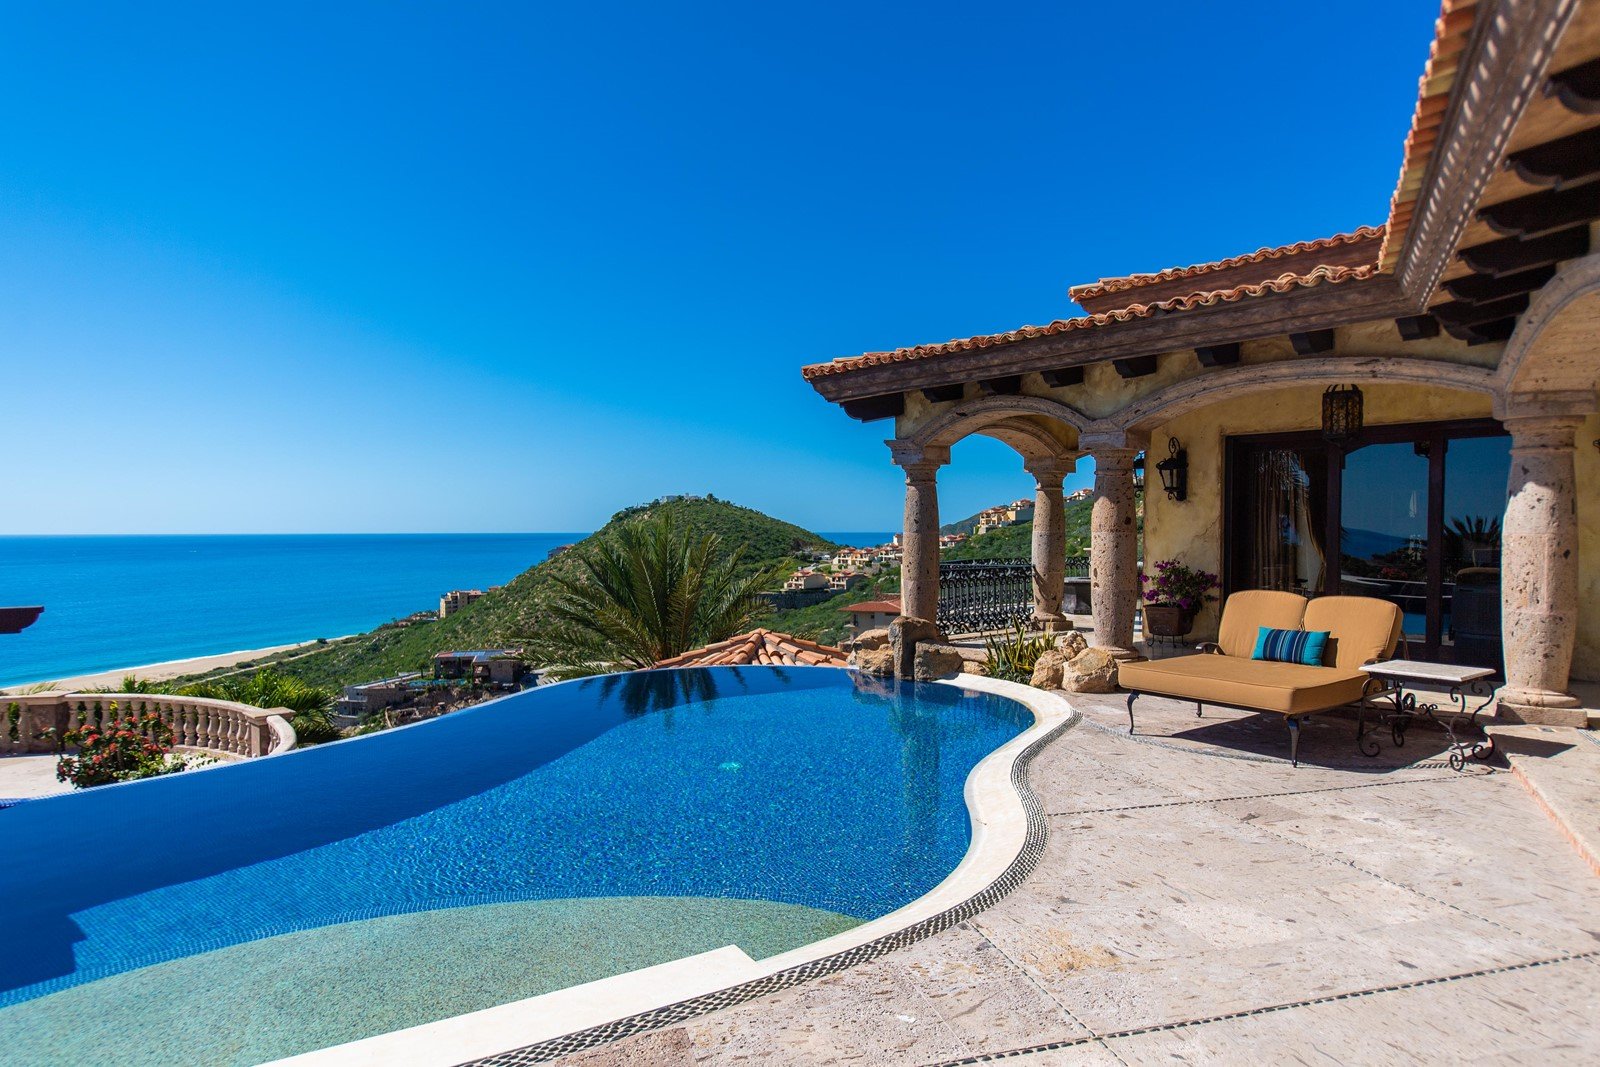 View of the ocean from Villa Maria, a six-bedroom home in Los Cabos.